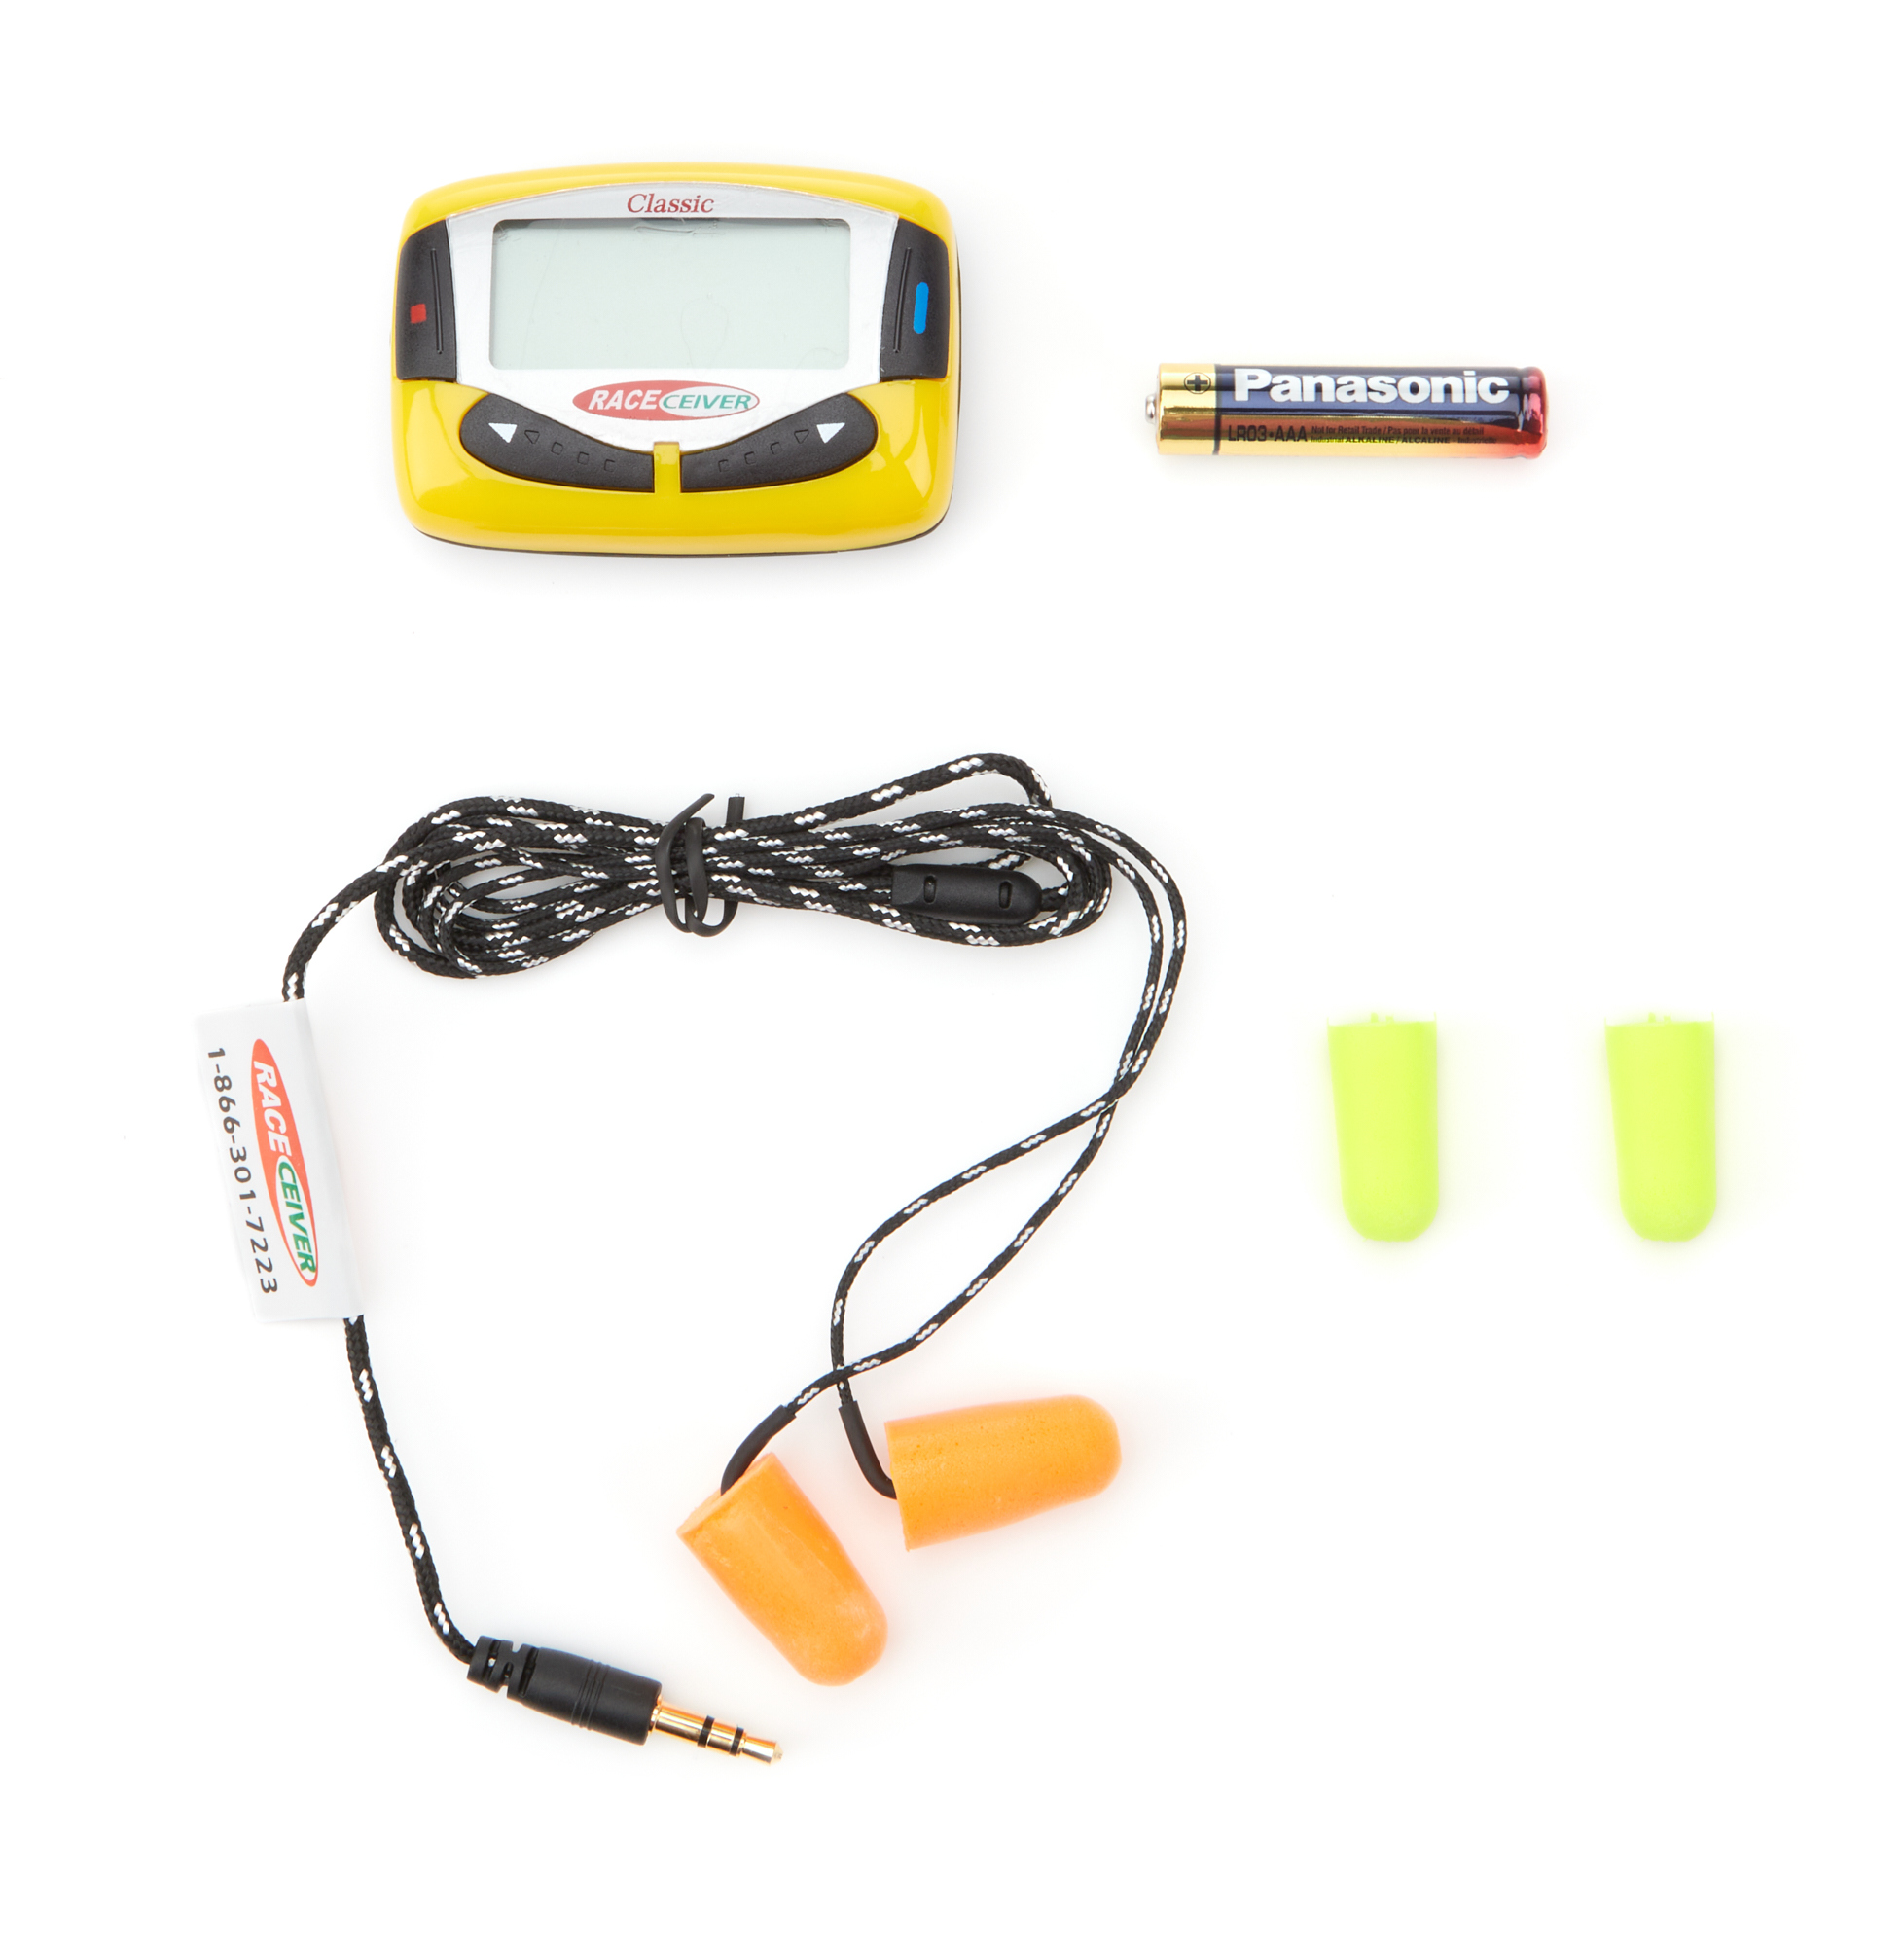 Raceceiver CFUS16SPK Radio Receiver, Classic Fusion Plus, LCD Screen, Semi-Pro Headphones / Holster Included, Plastic, Yellow, Each